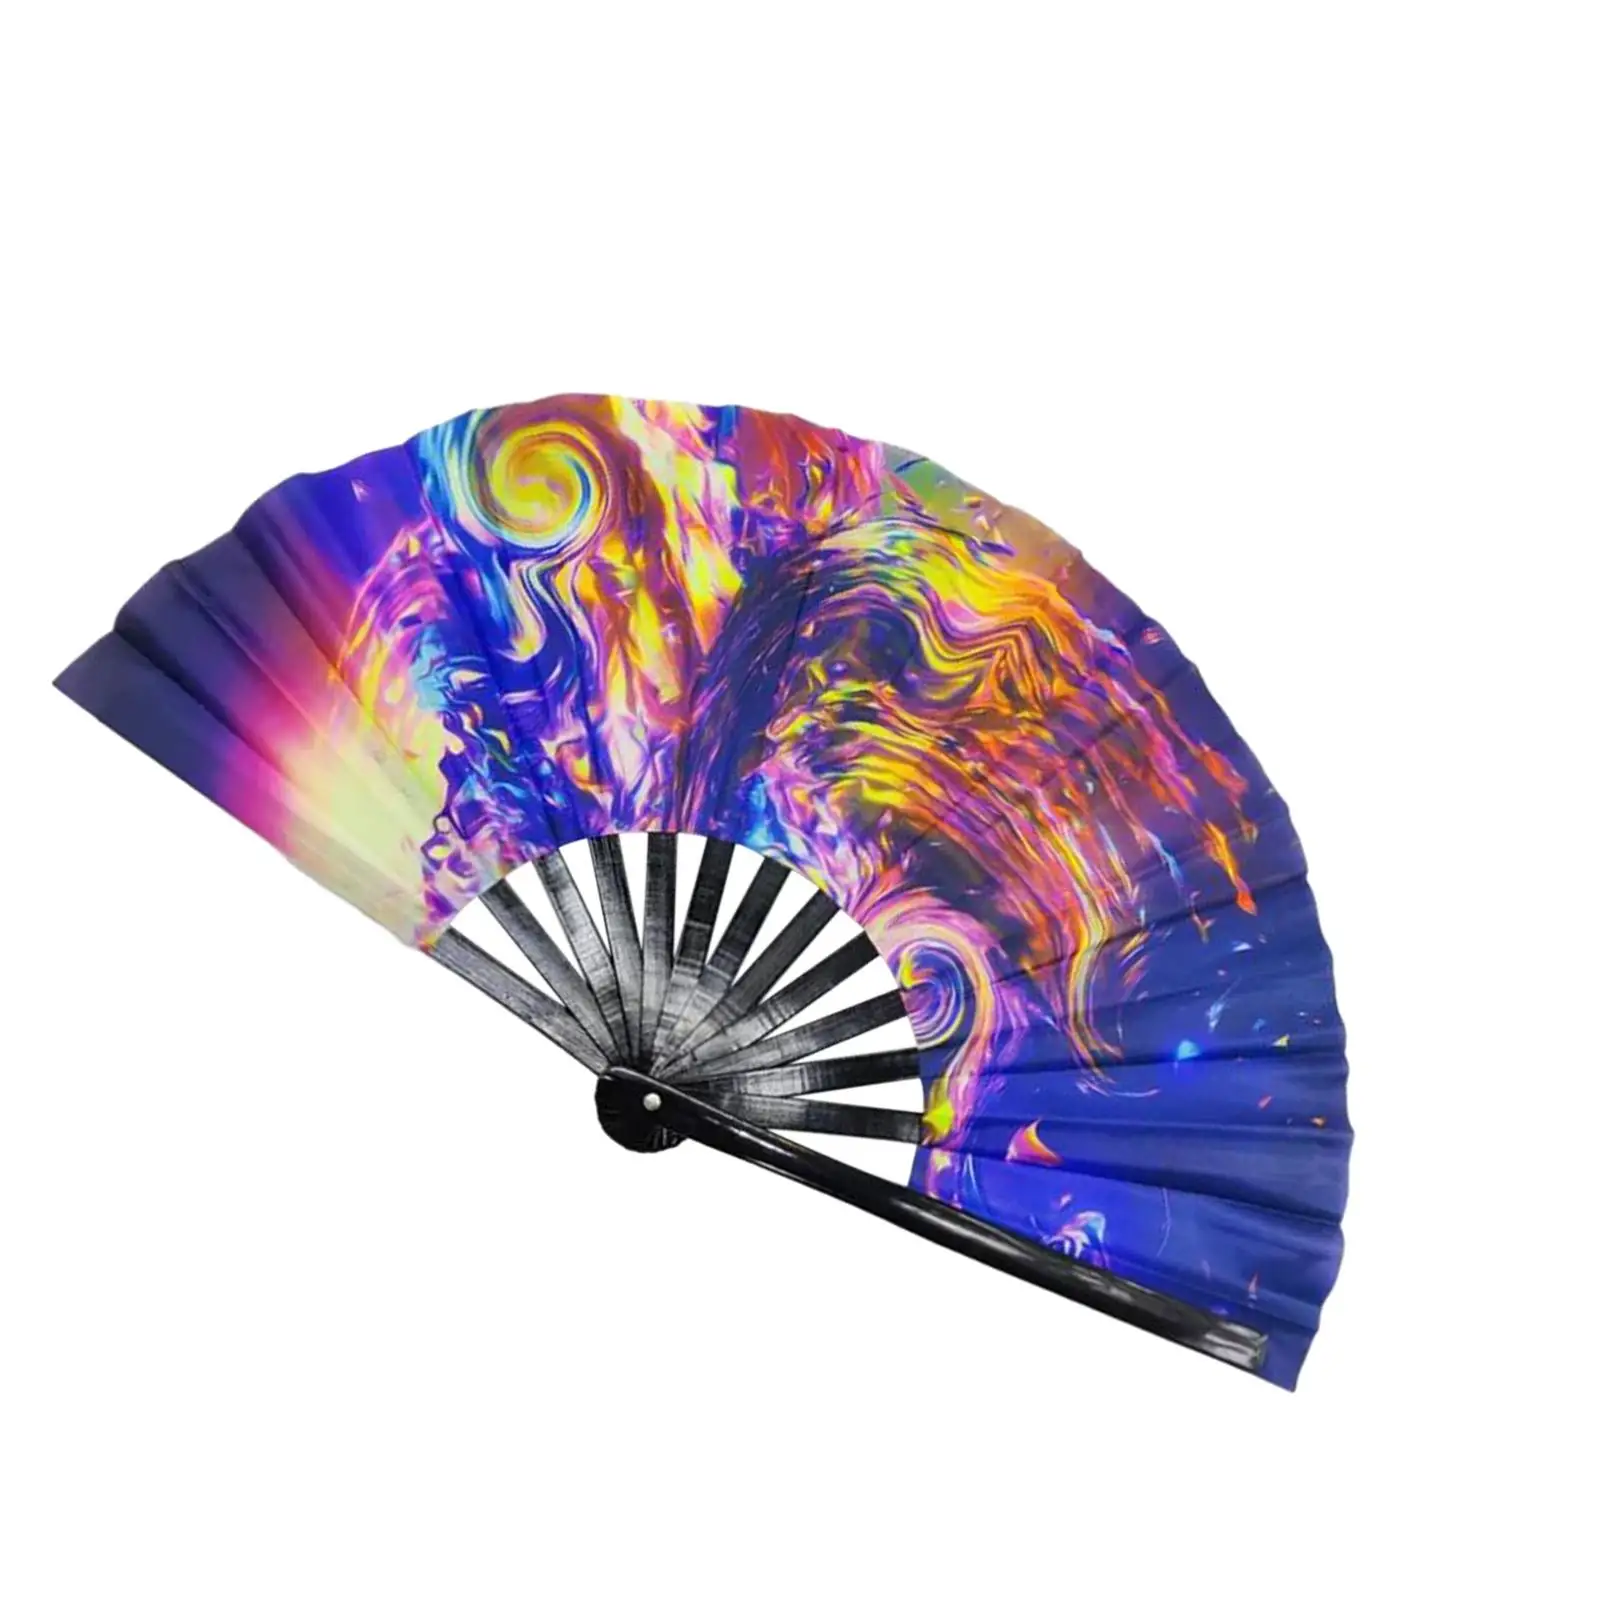 Folding Hand Fan Fluorescent Effects for Roles Play Party Supplies Theater